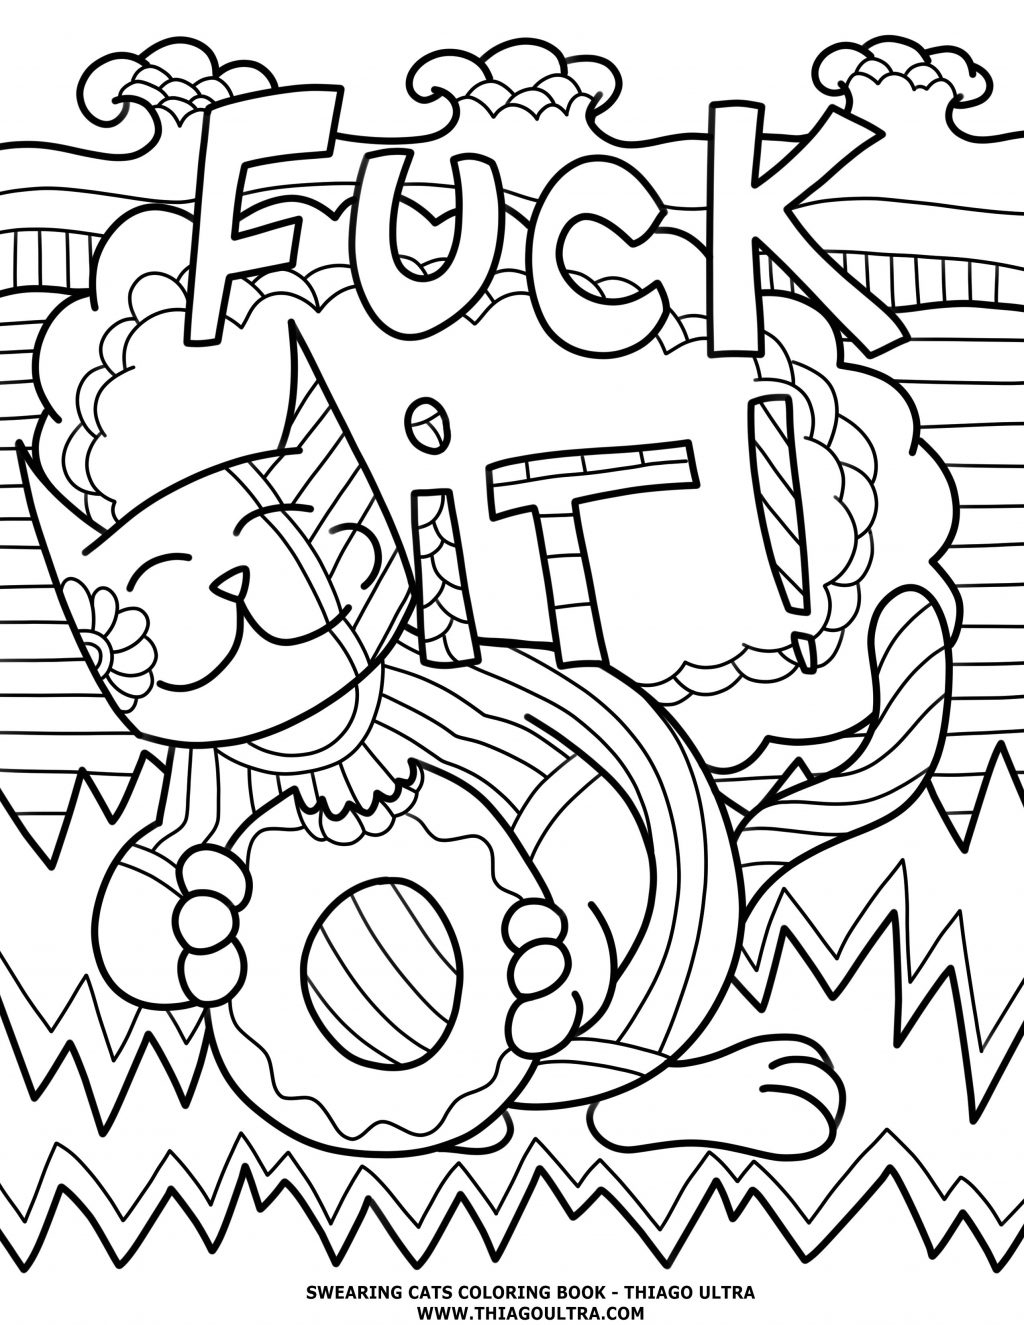 Coloring Pages ~ Free Printable Coloring Pages For Adults Swear - Swear Word Coloring Pages Printable Free